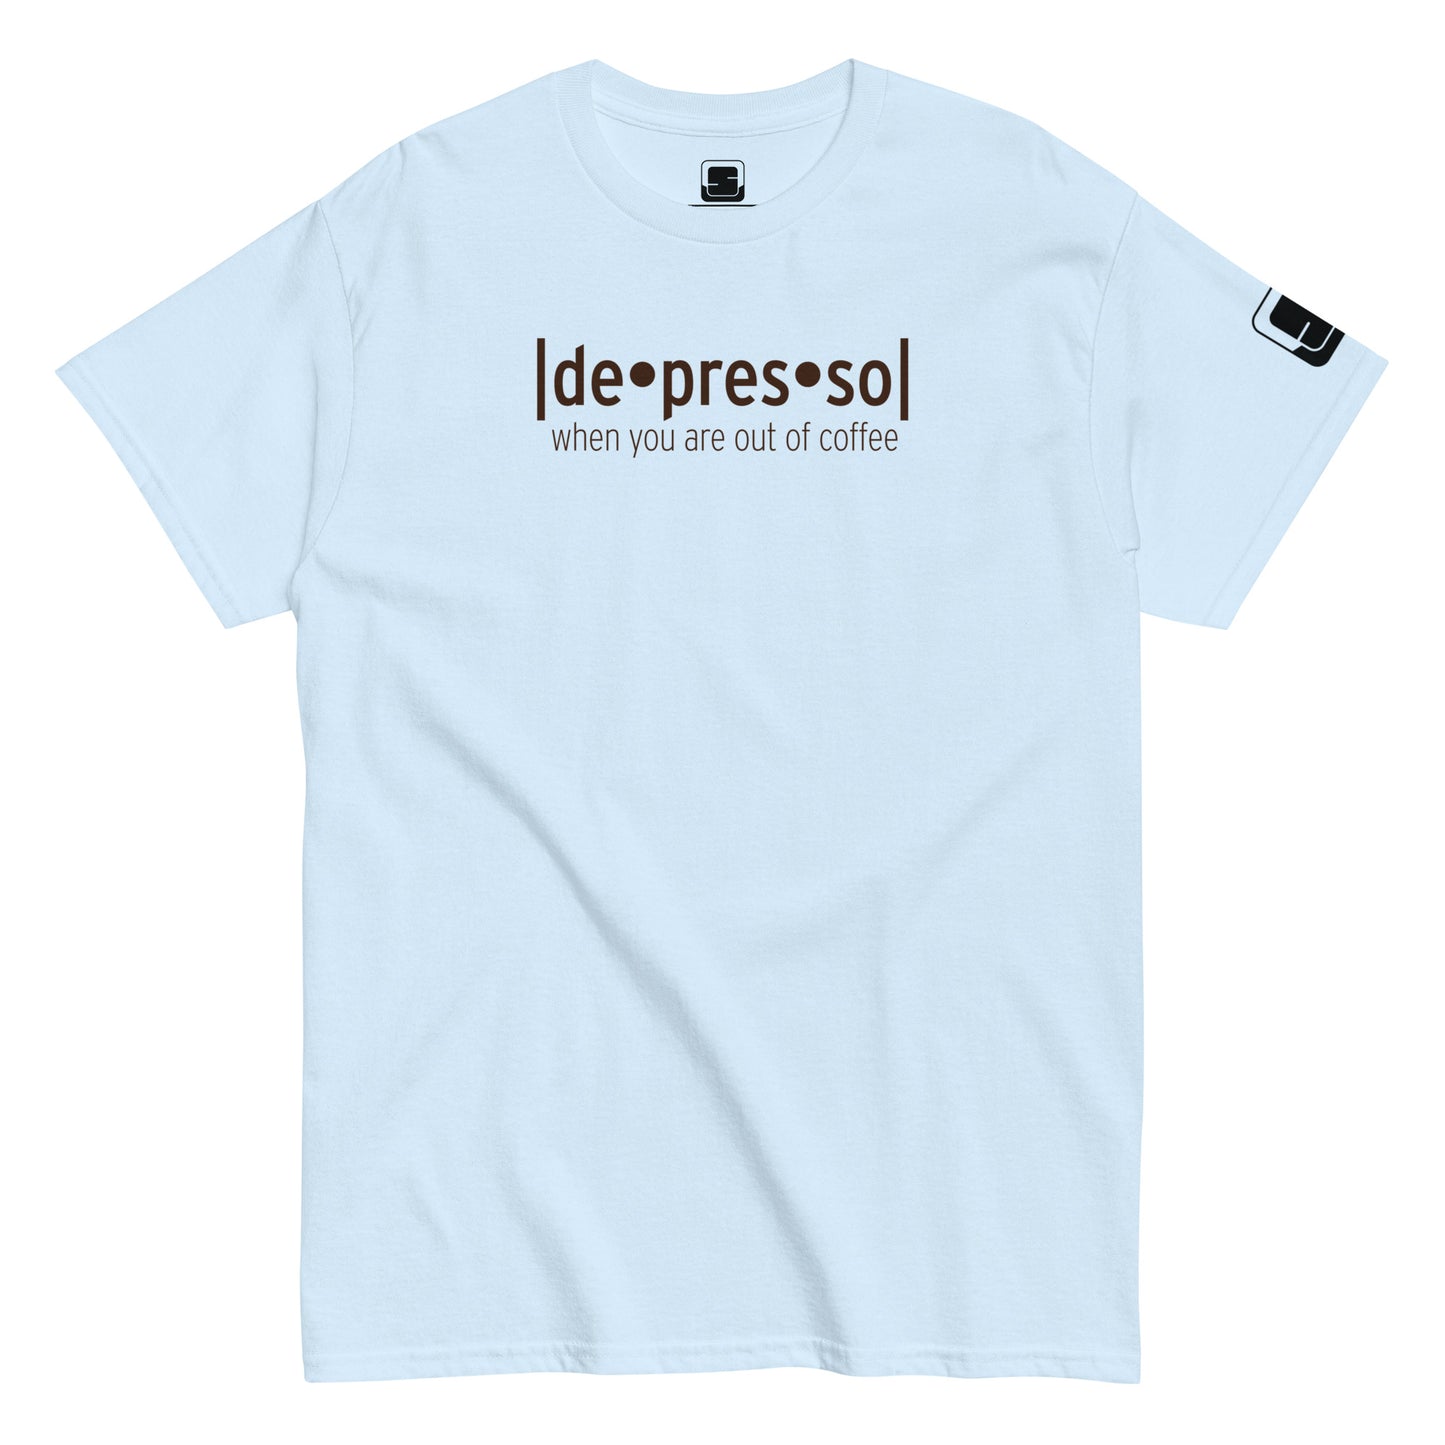 Light blue t-shirt with the humorous phrase '[de]presso' followed by 'when you are out of coffee' in dark lettering, featuring a small black logo patch on the sleeve, displayed on a flat surface with a white background.